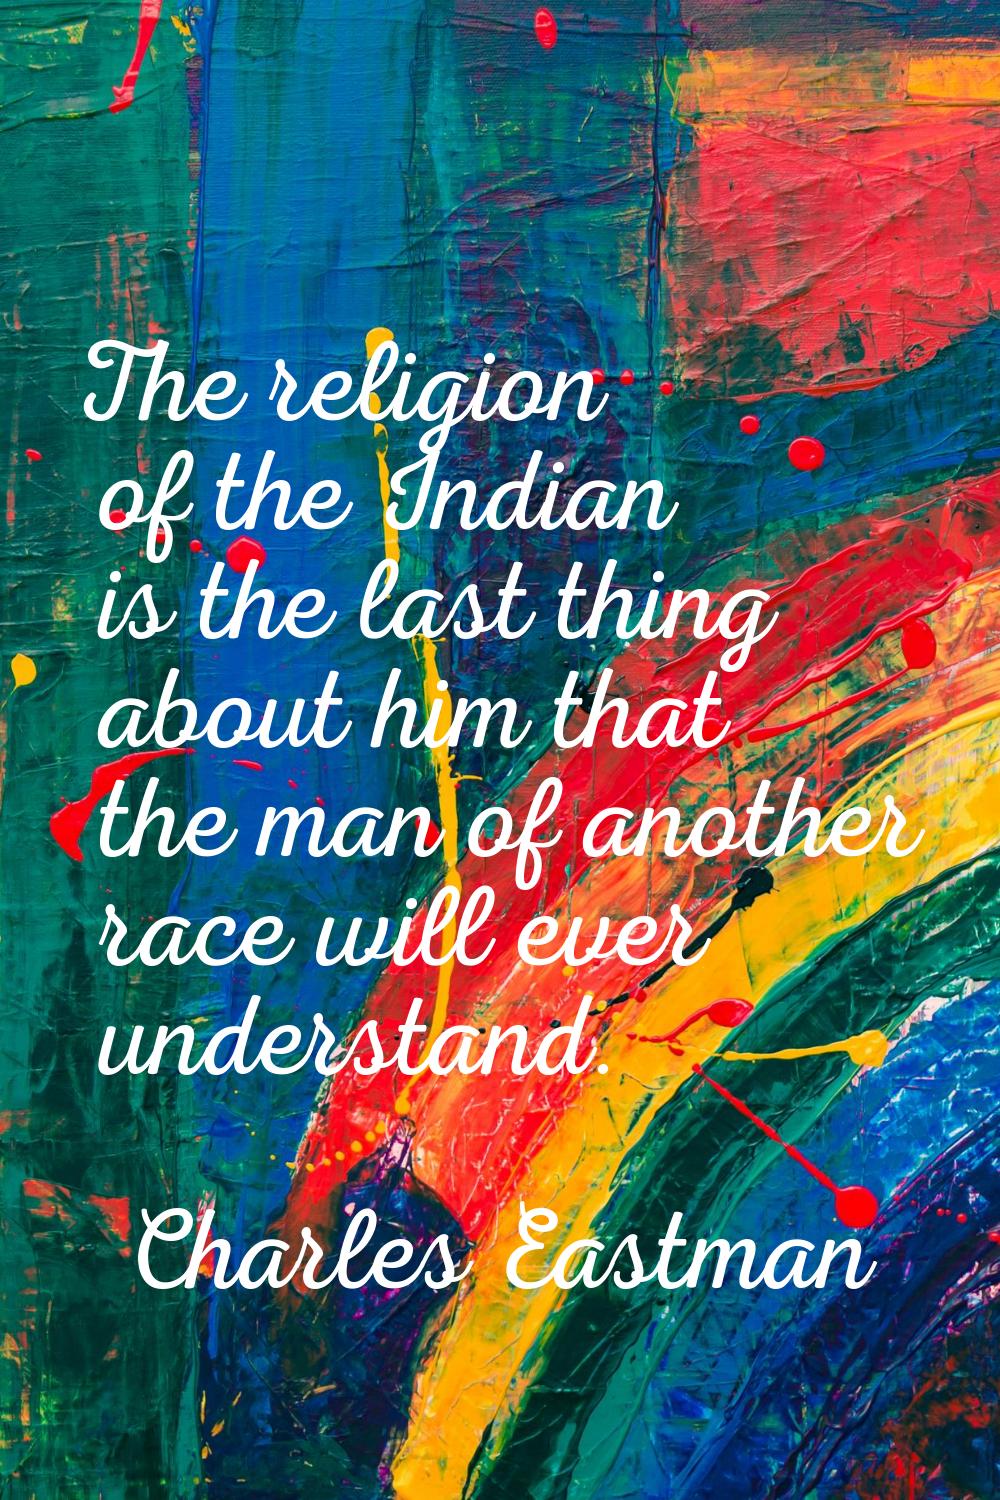 The religion of the Indian is the last thing about him that the man of another race will ever under